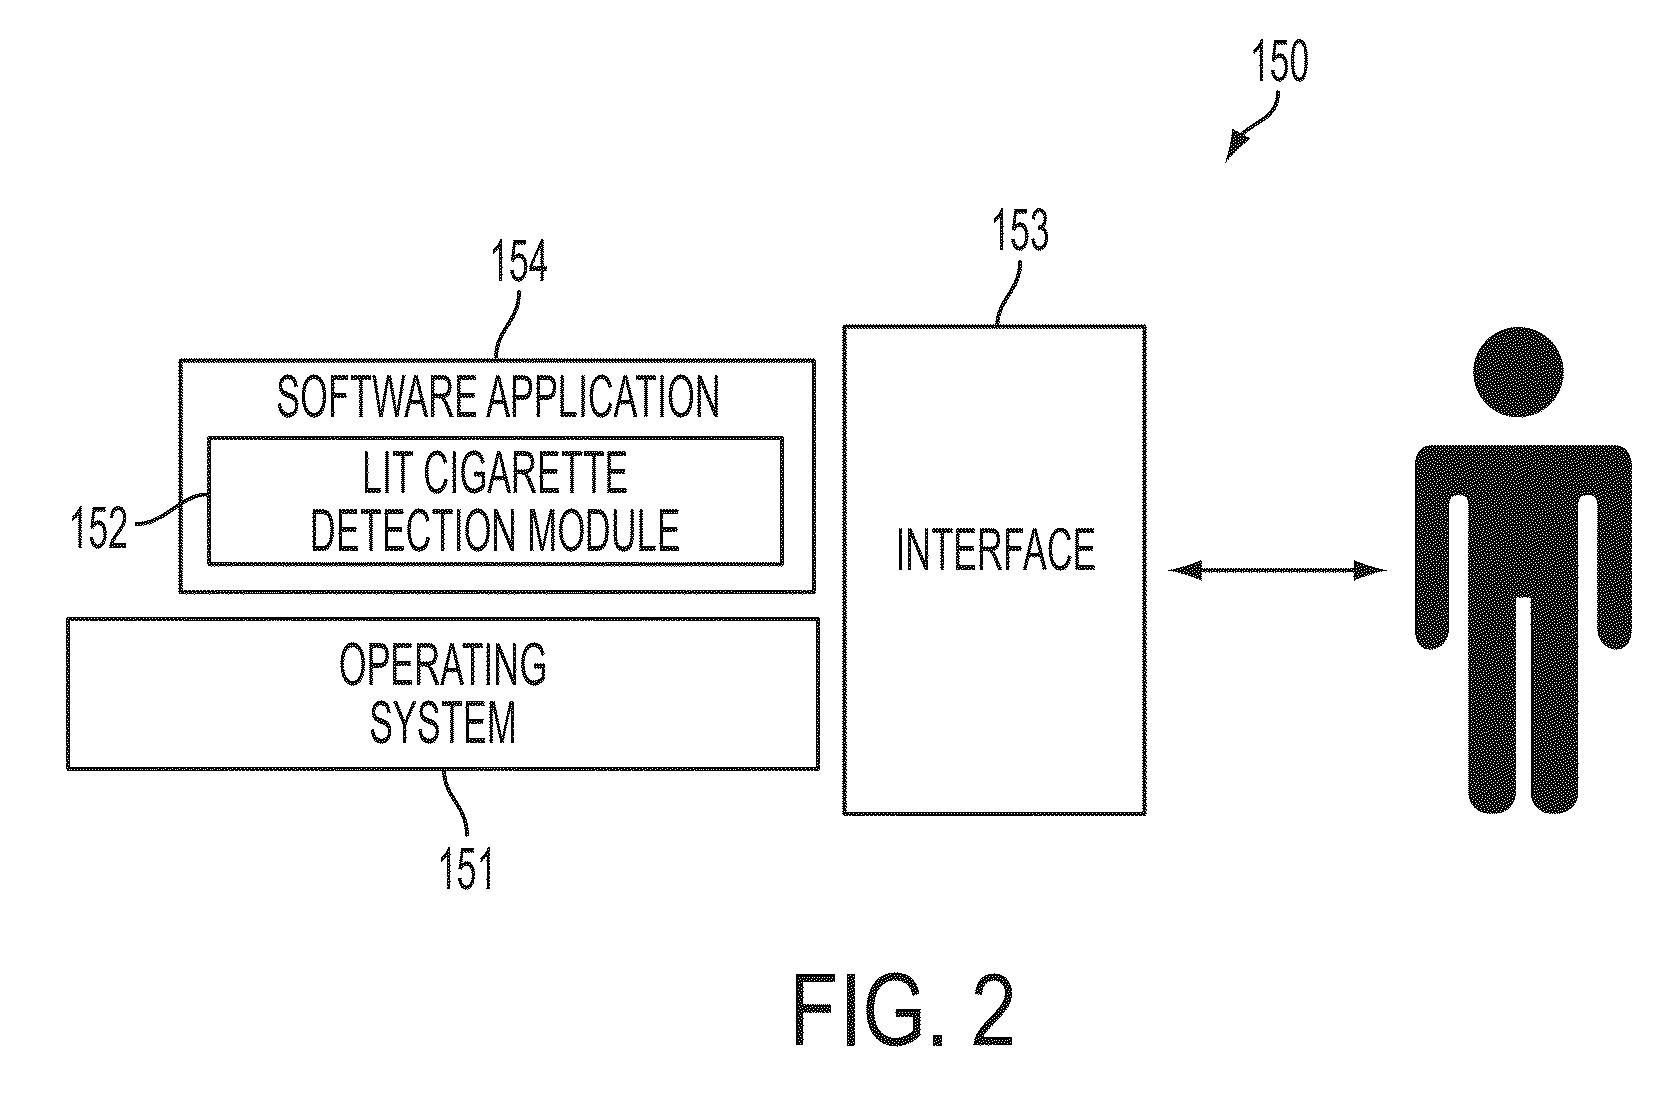 Automated method and system for detecting the presence of a lit cigarette